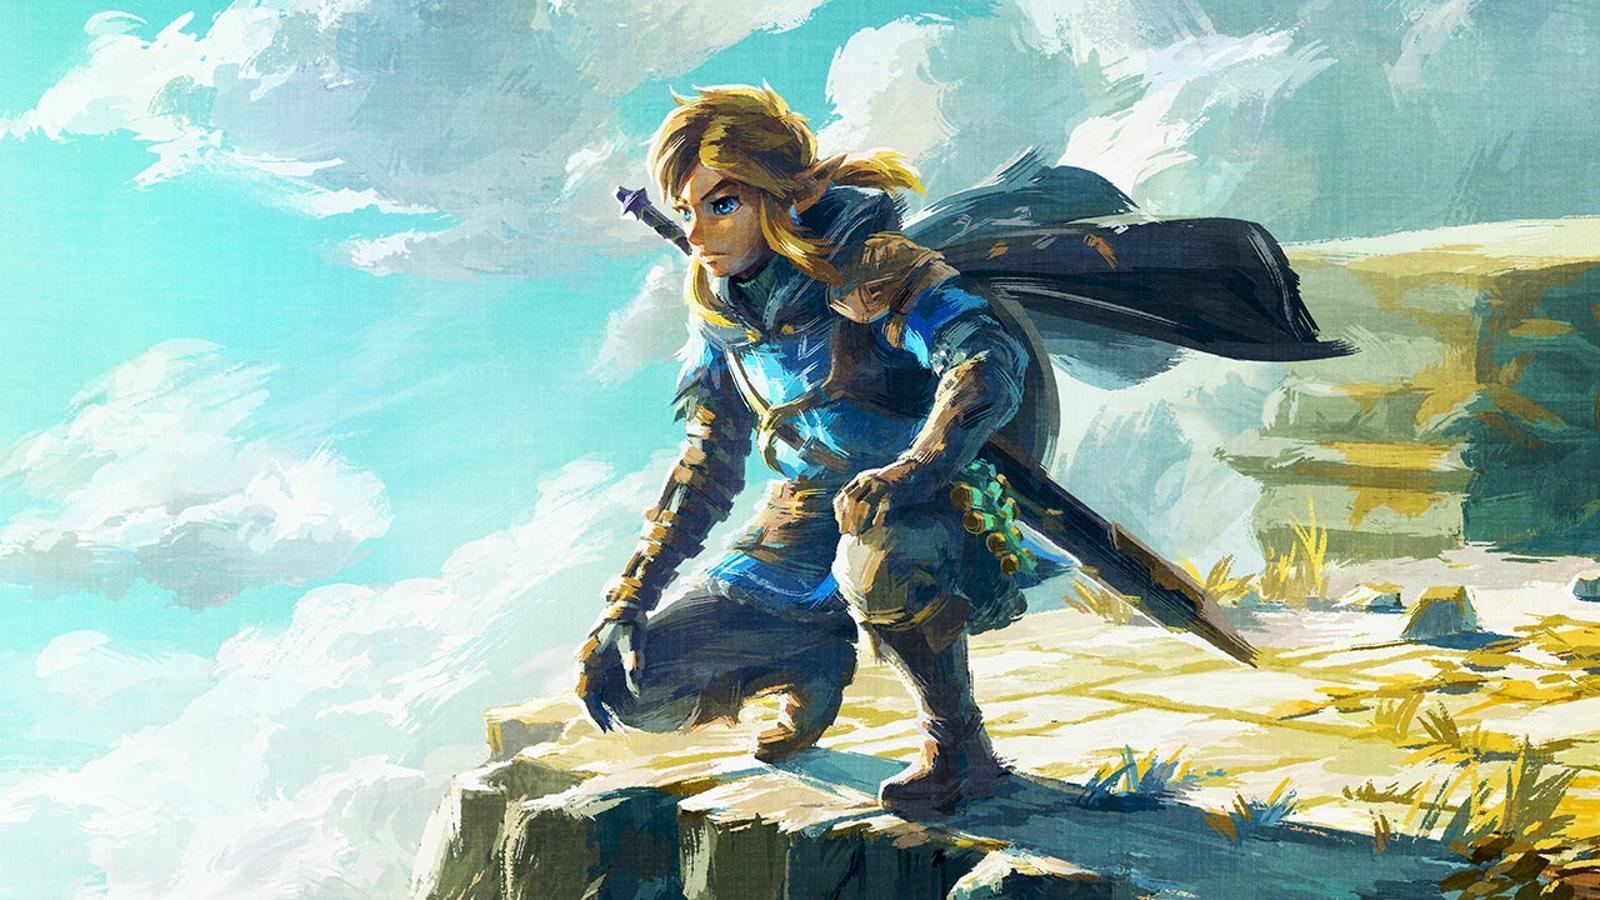 Nintendo is officially making a live-action Zelda movie